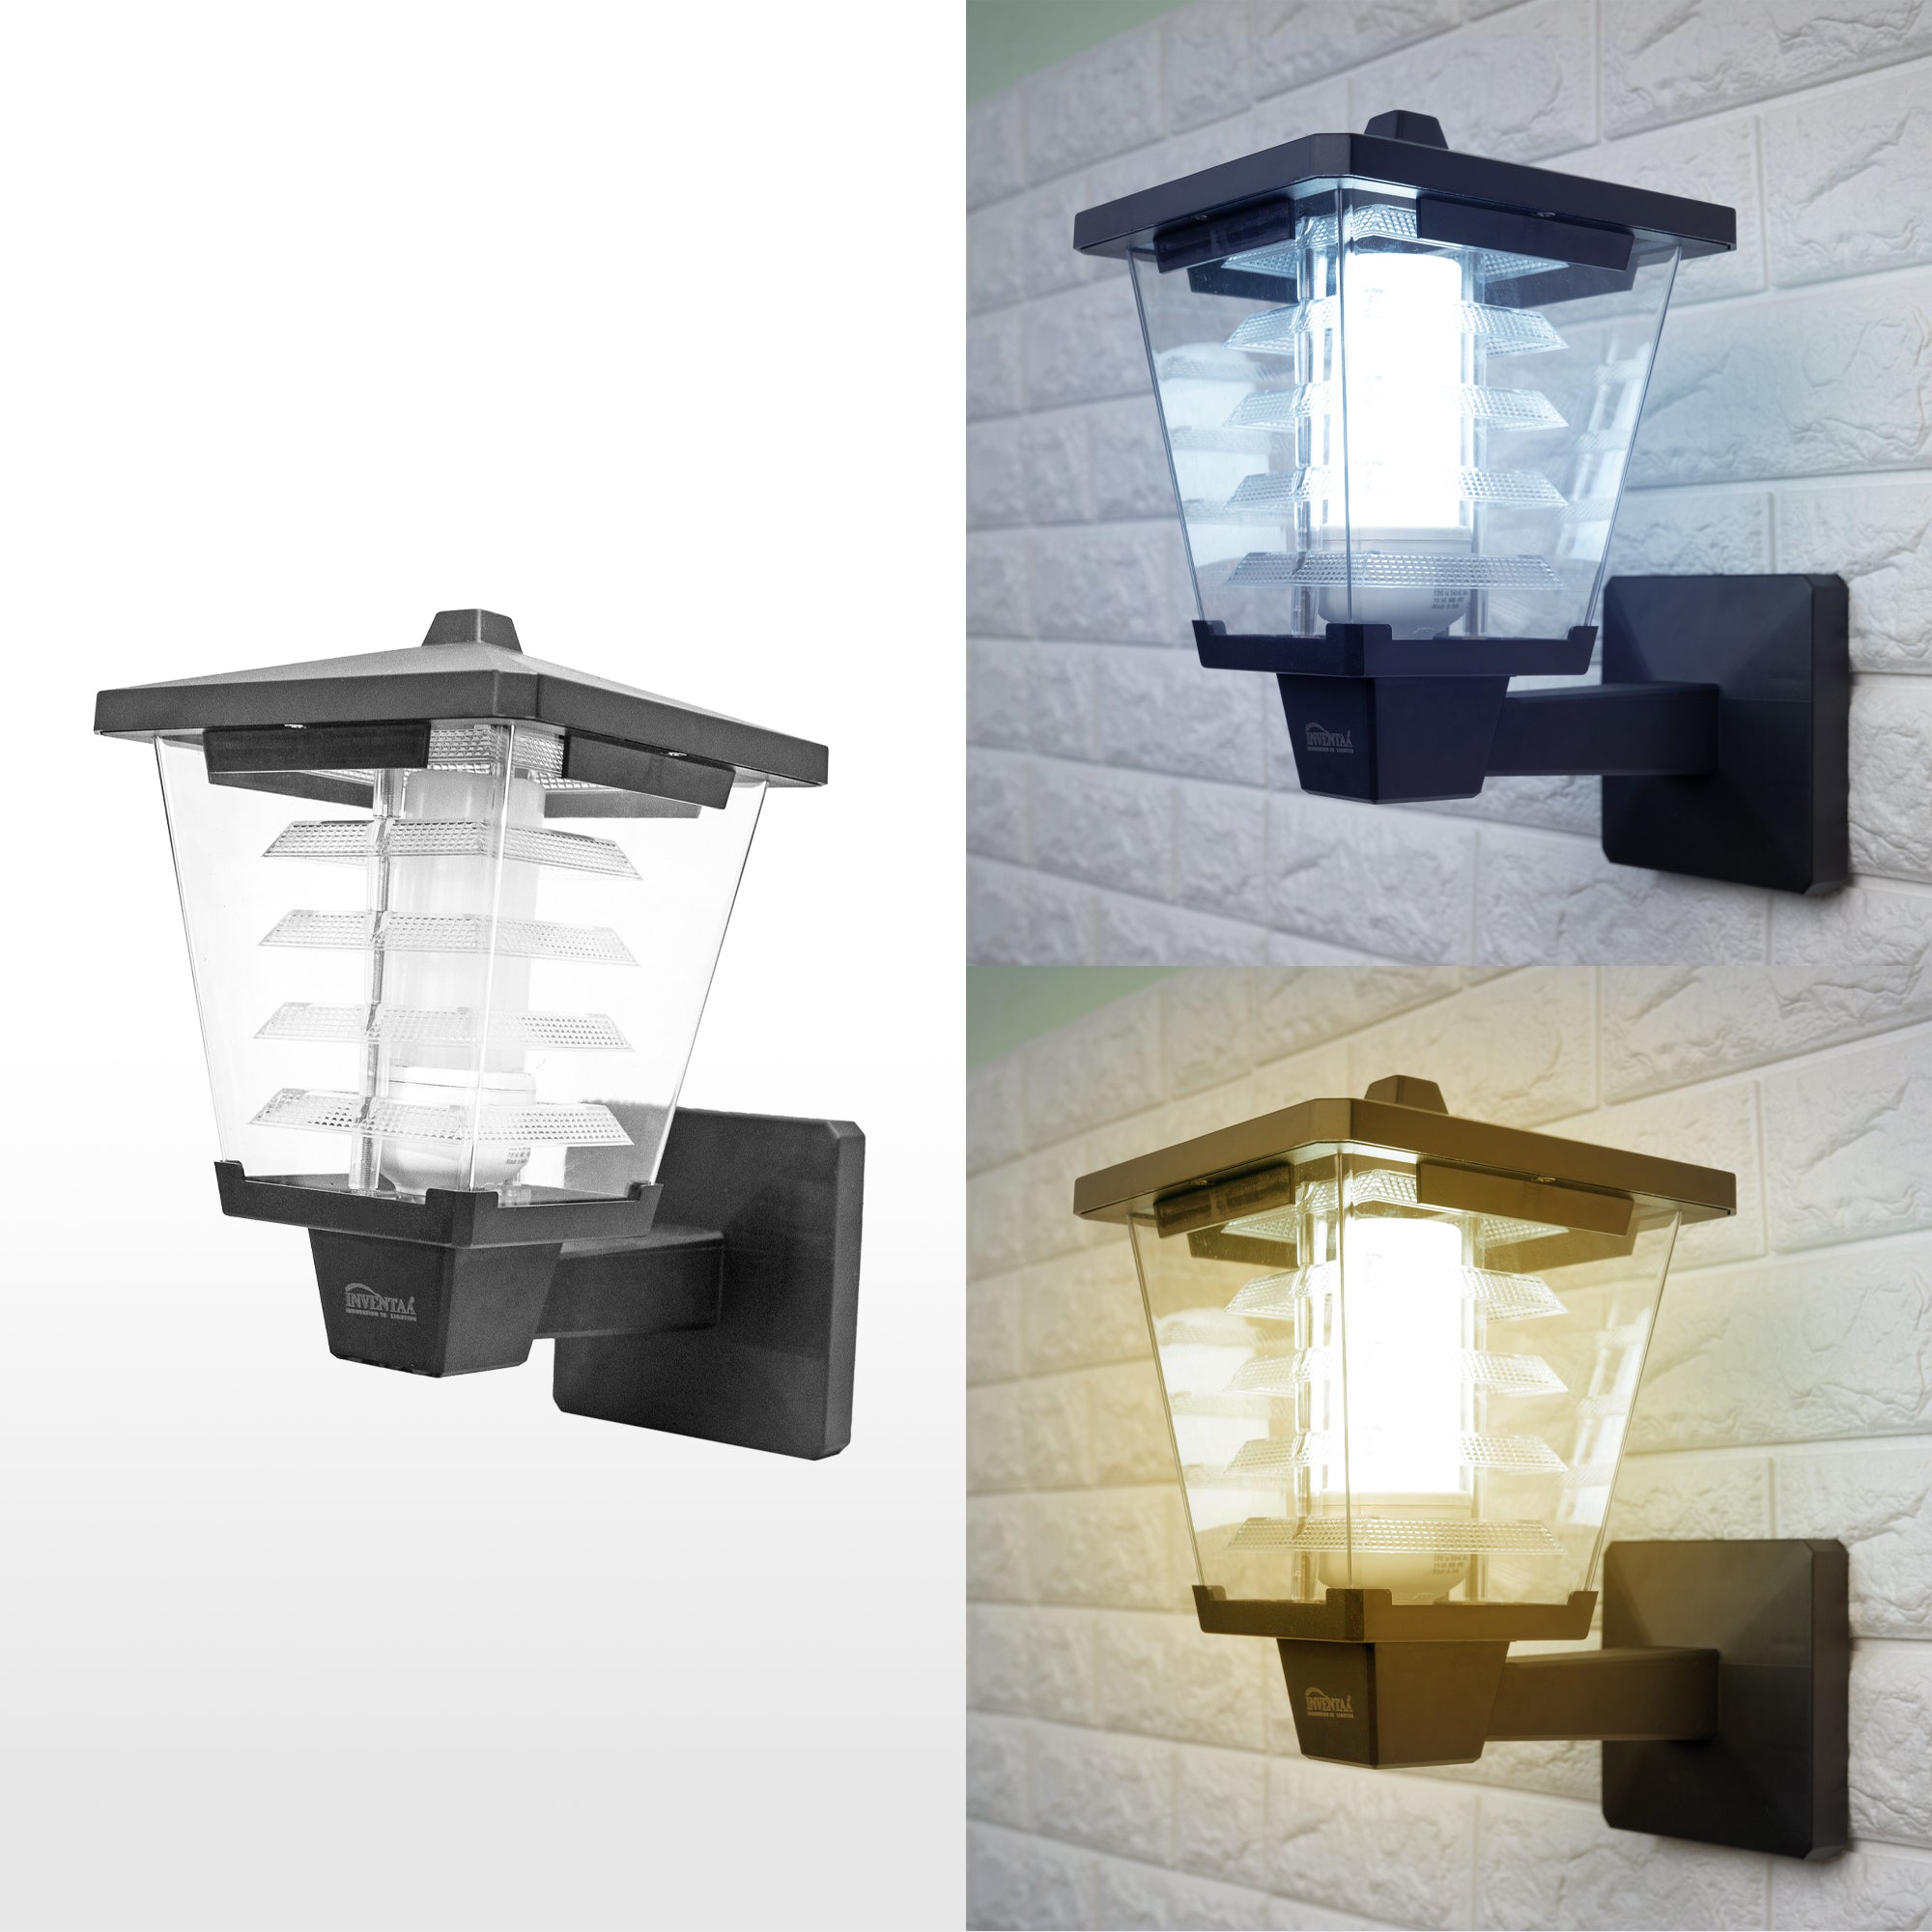 Cool and warm lighting comparison of wall glasis led wall light